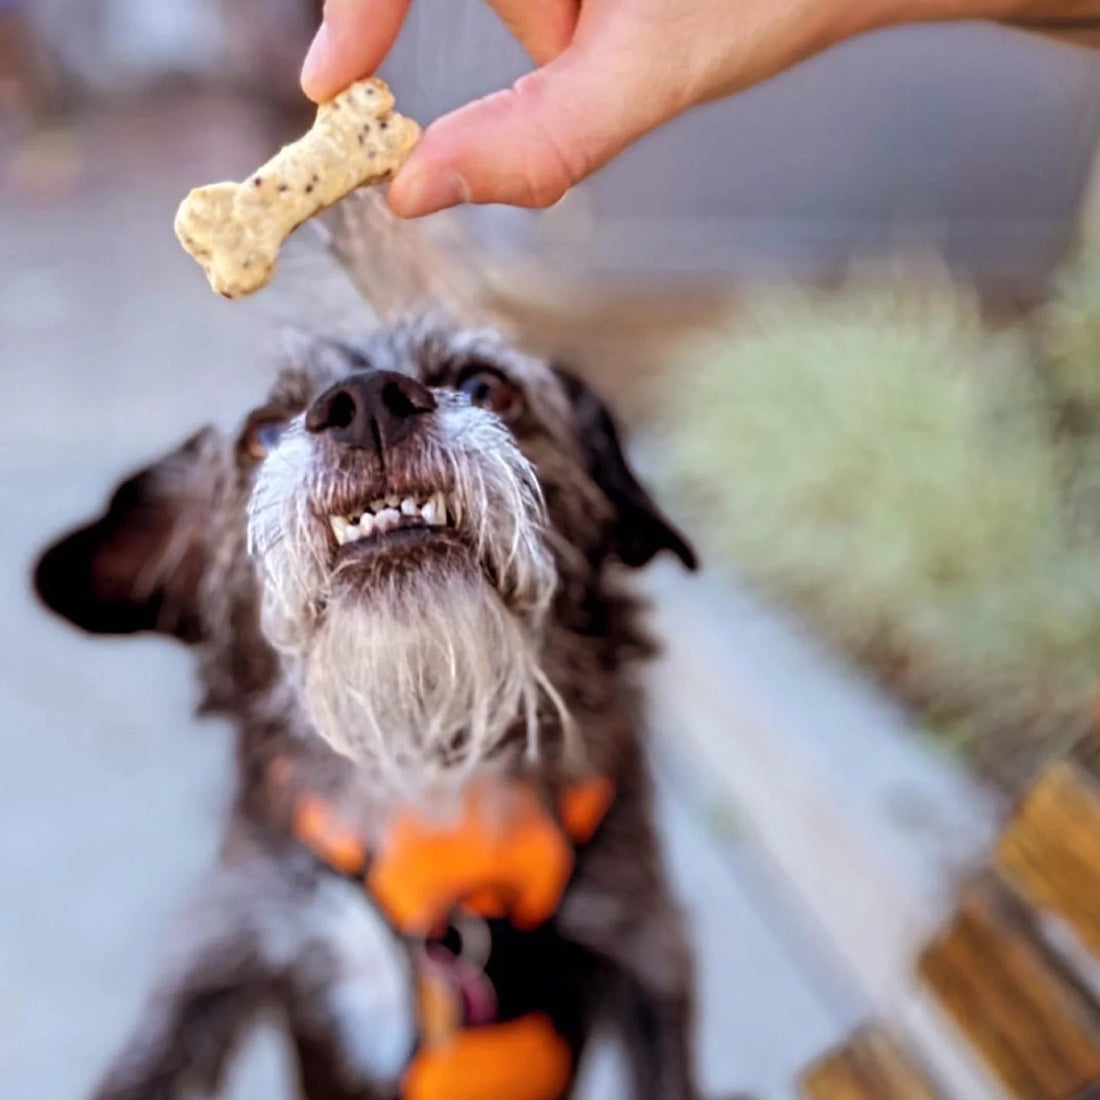 Easy 3 Ingredient Treat Recipes To Make At Home For Your Dog – Homemade Pupsicles For Summer